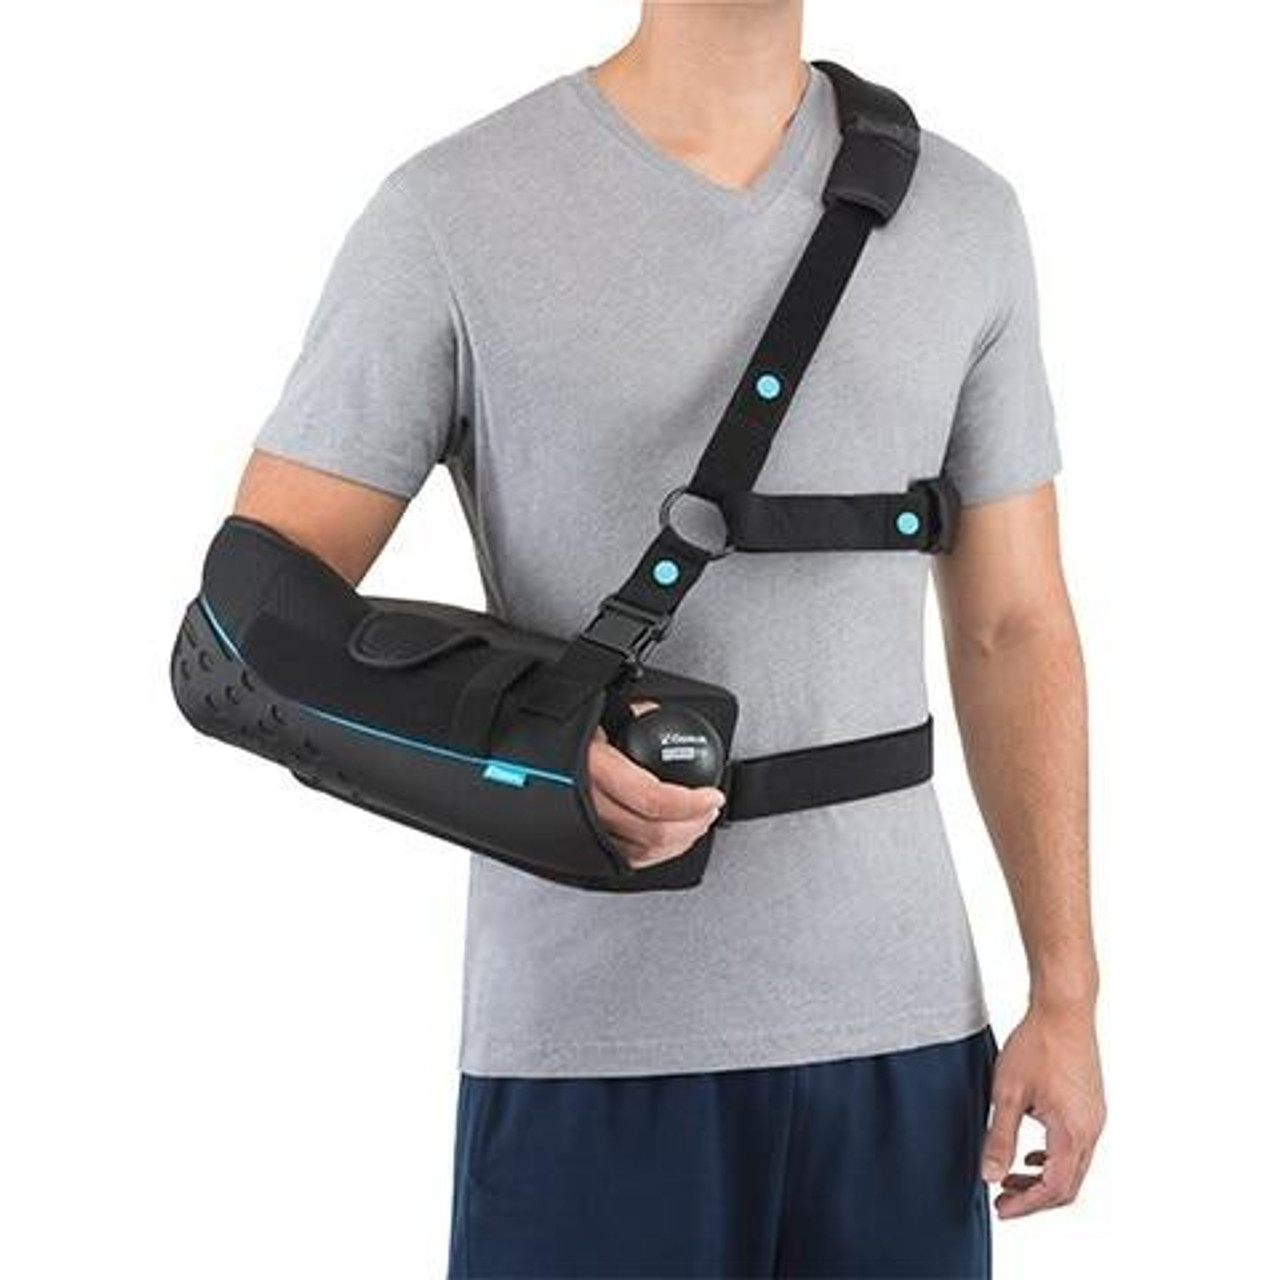 Universal Shoulder Rotator Cuff Sling Immobilizer with Abduction